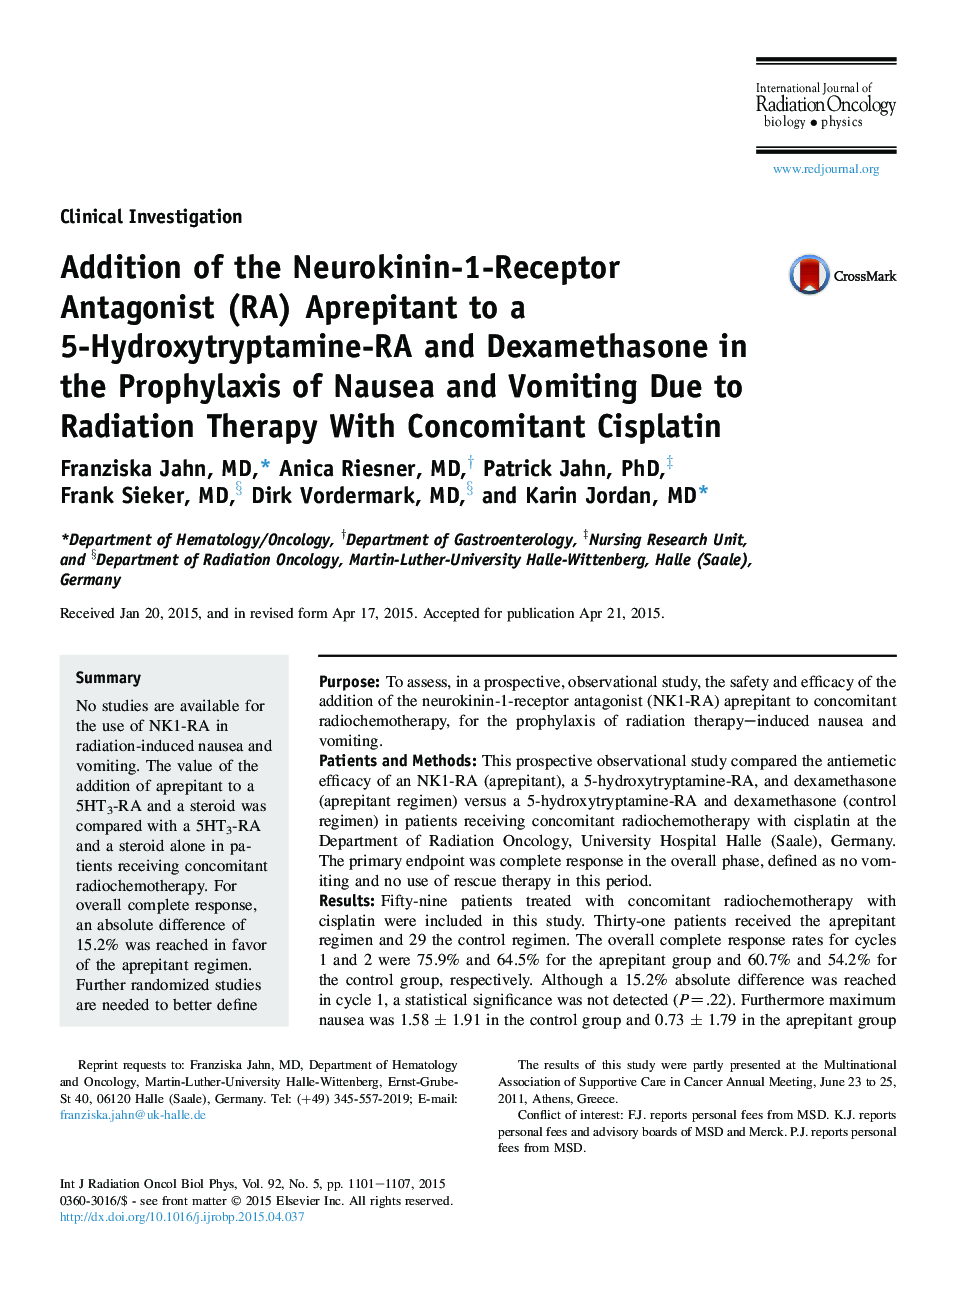 Addition of the Neurokinin-1-Receptor Antagonist (RA) Aprepitant to a 5-Hydroxytryptamine-RA and Dexamethasone in the Prophylaxis of Nausea and Vomiting Due to Radiation Therapy With Concomitant Cisplatin